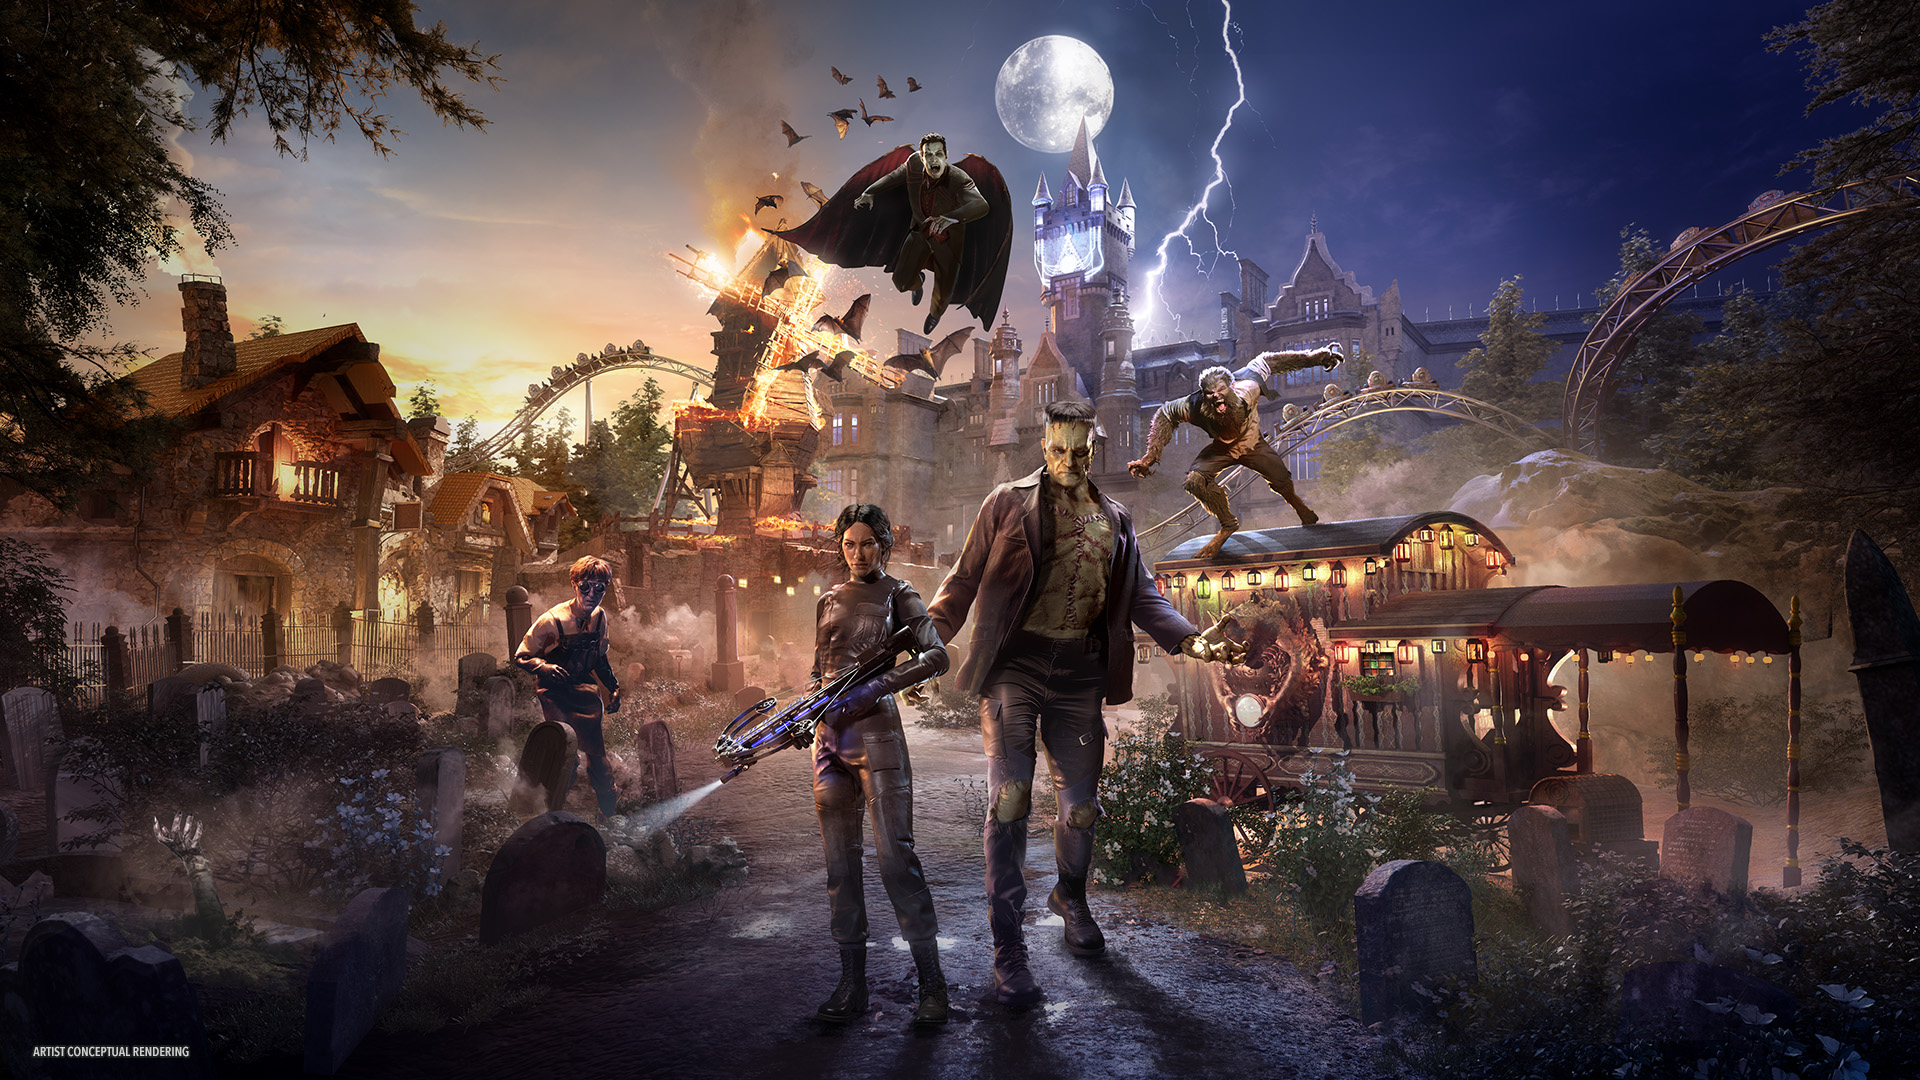 Universal Orlando Resort Unveils Heart-Pounding New Details About Dark Universe – A Shadowy World of Legendary Monsters Coming to Universal Epic Universe in 2025 